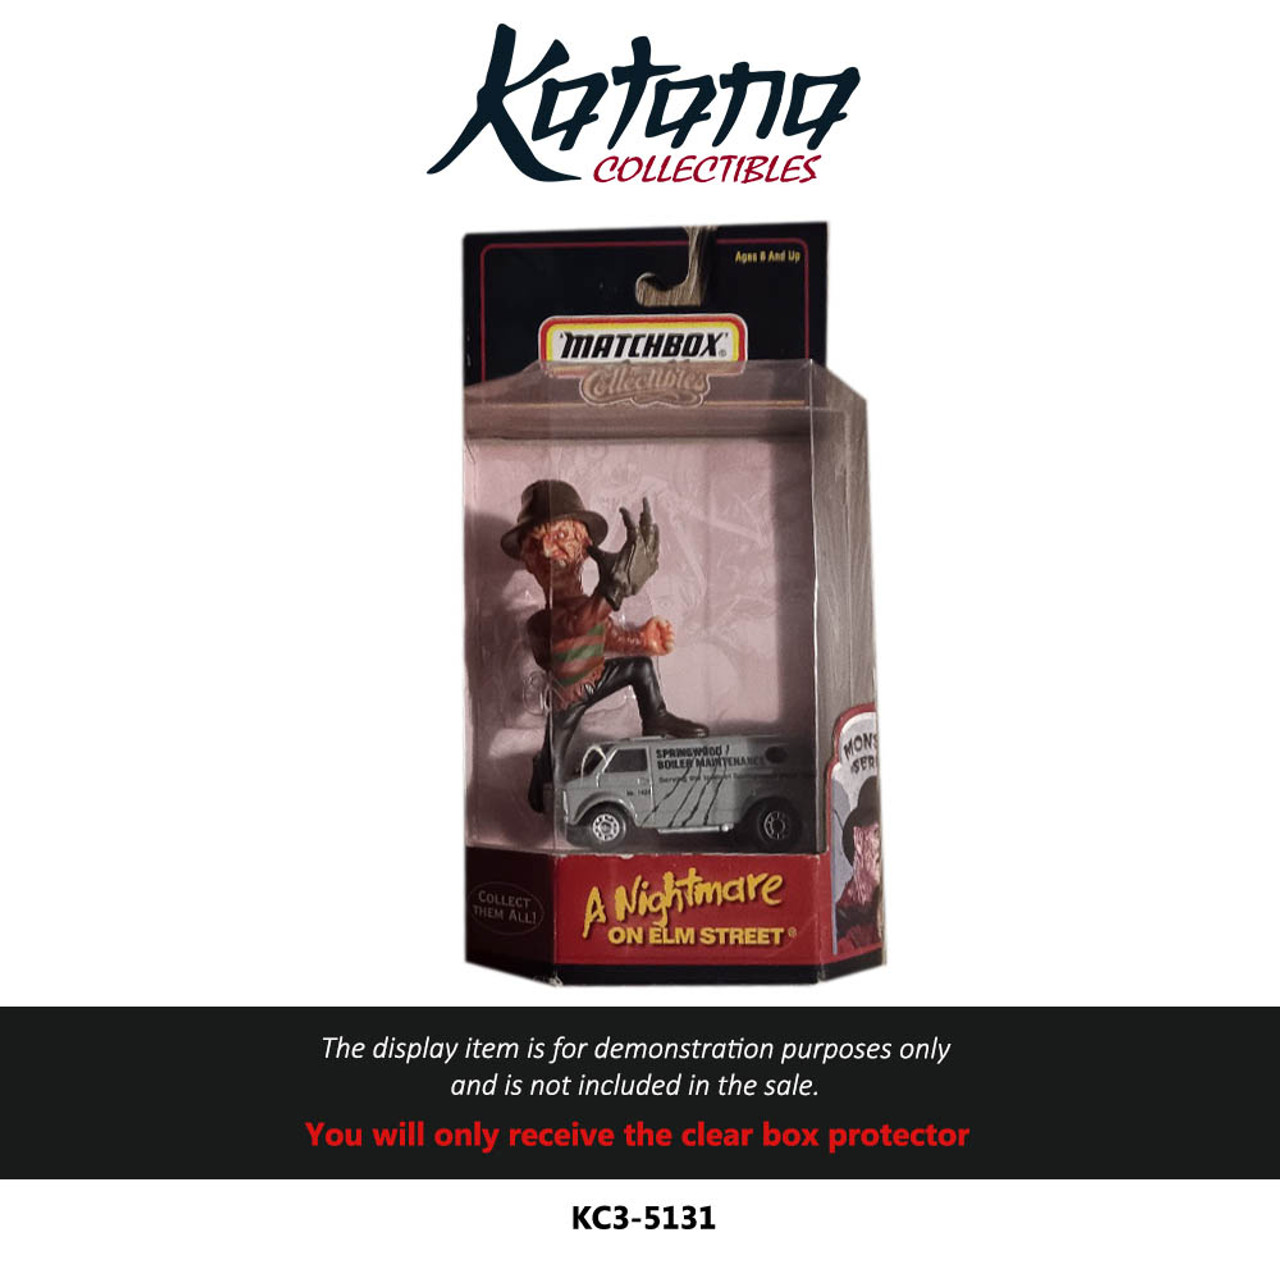 Katana Collectibles Protector For Match Box : A Nightmare on Elm Street